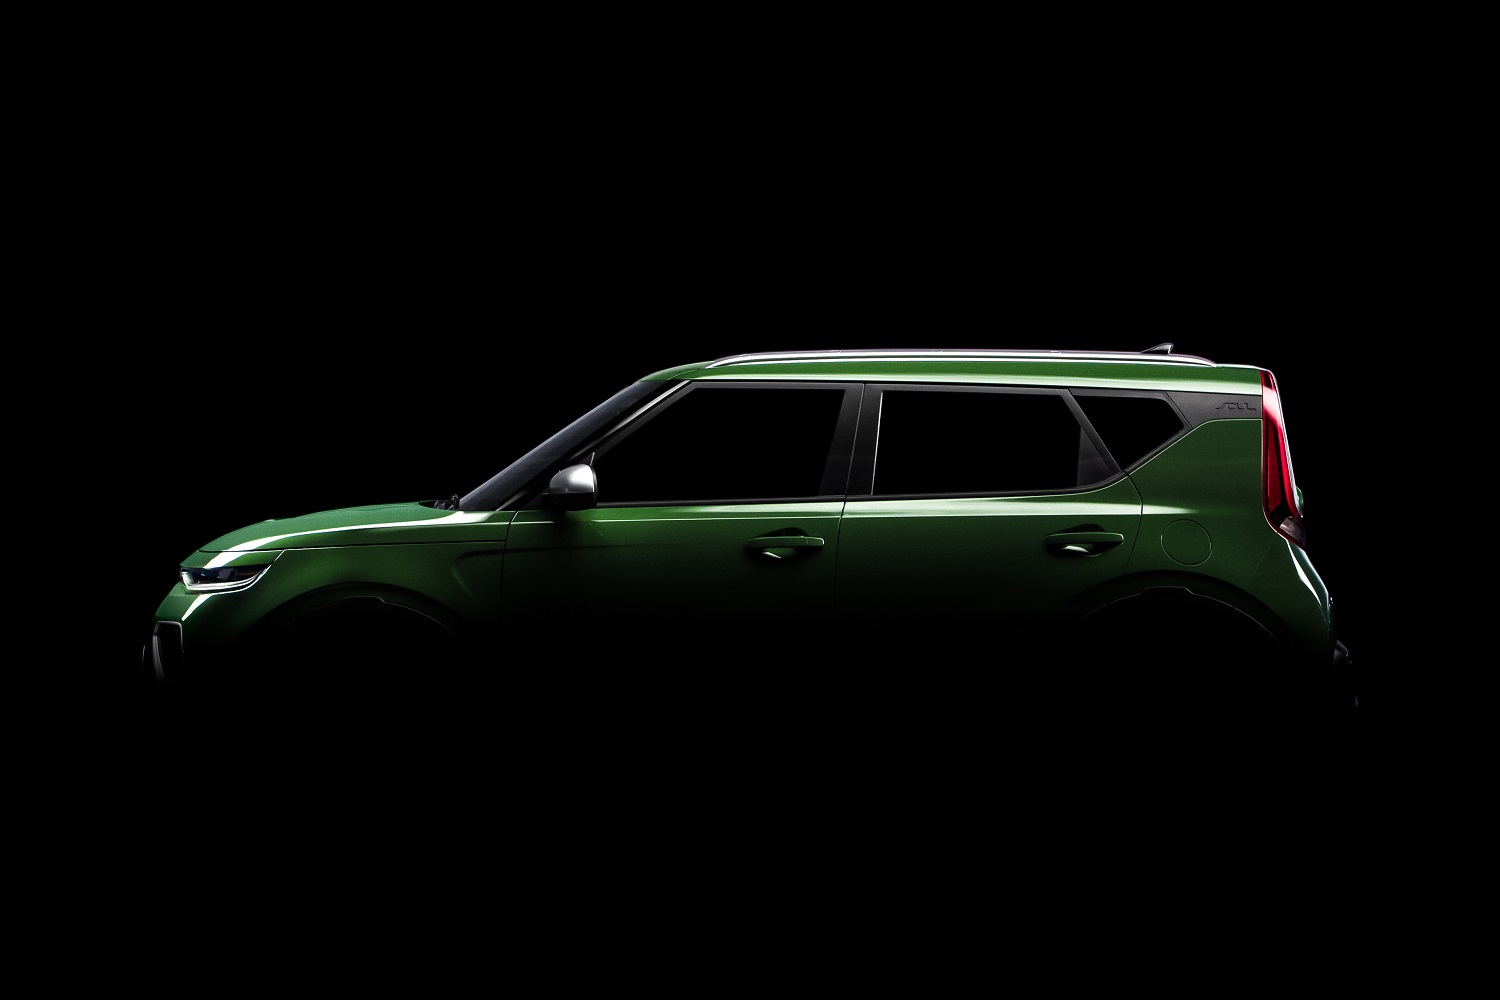 2020 kia soul grows up while staying hip and boxy la auto show teaser  2